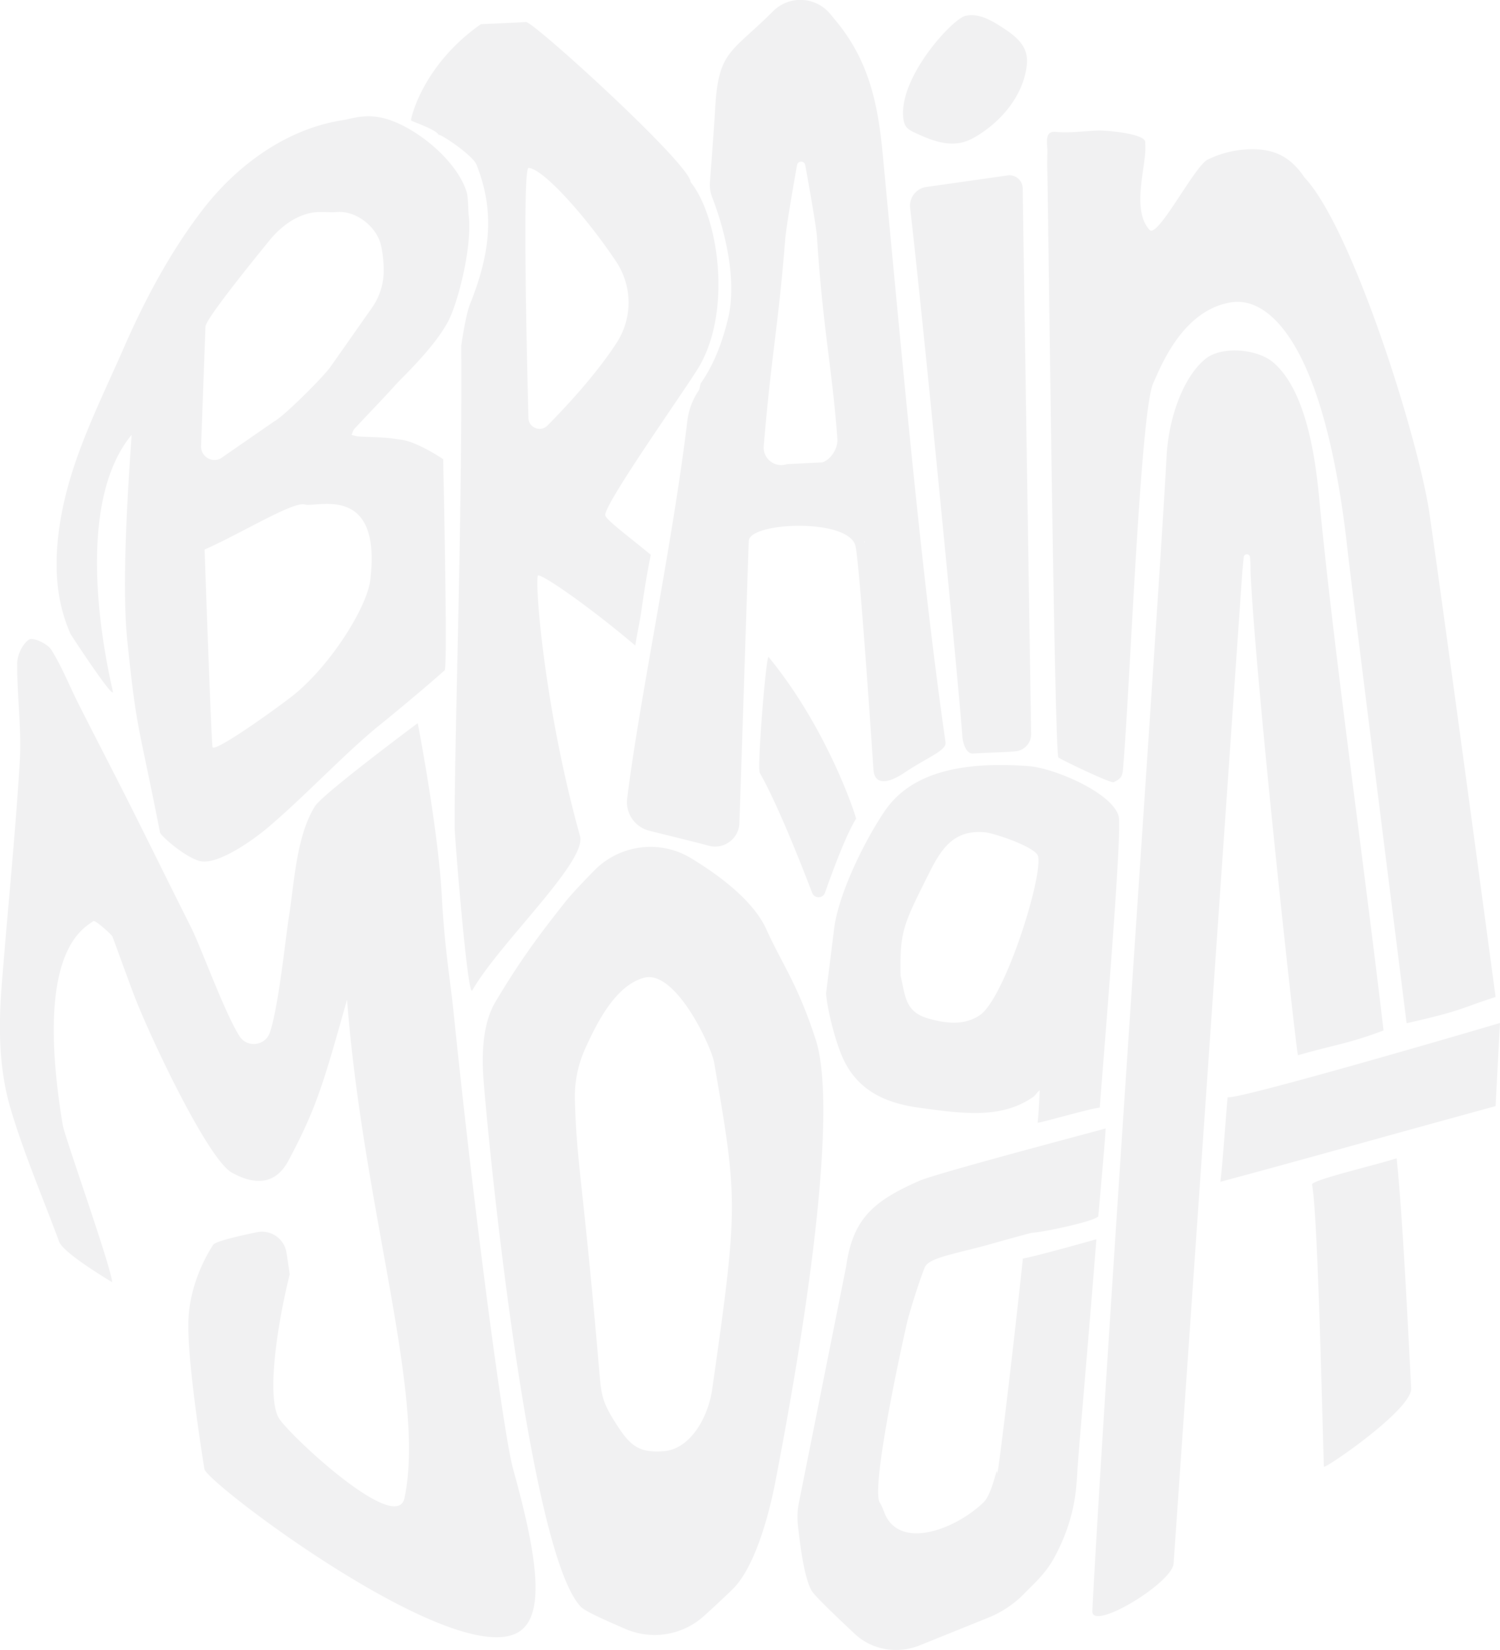 Brain Yoga™ | The Only Way To Lose Is To Not Play